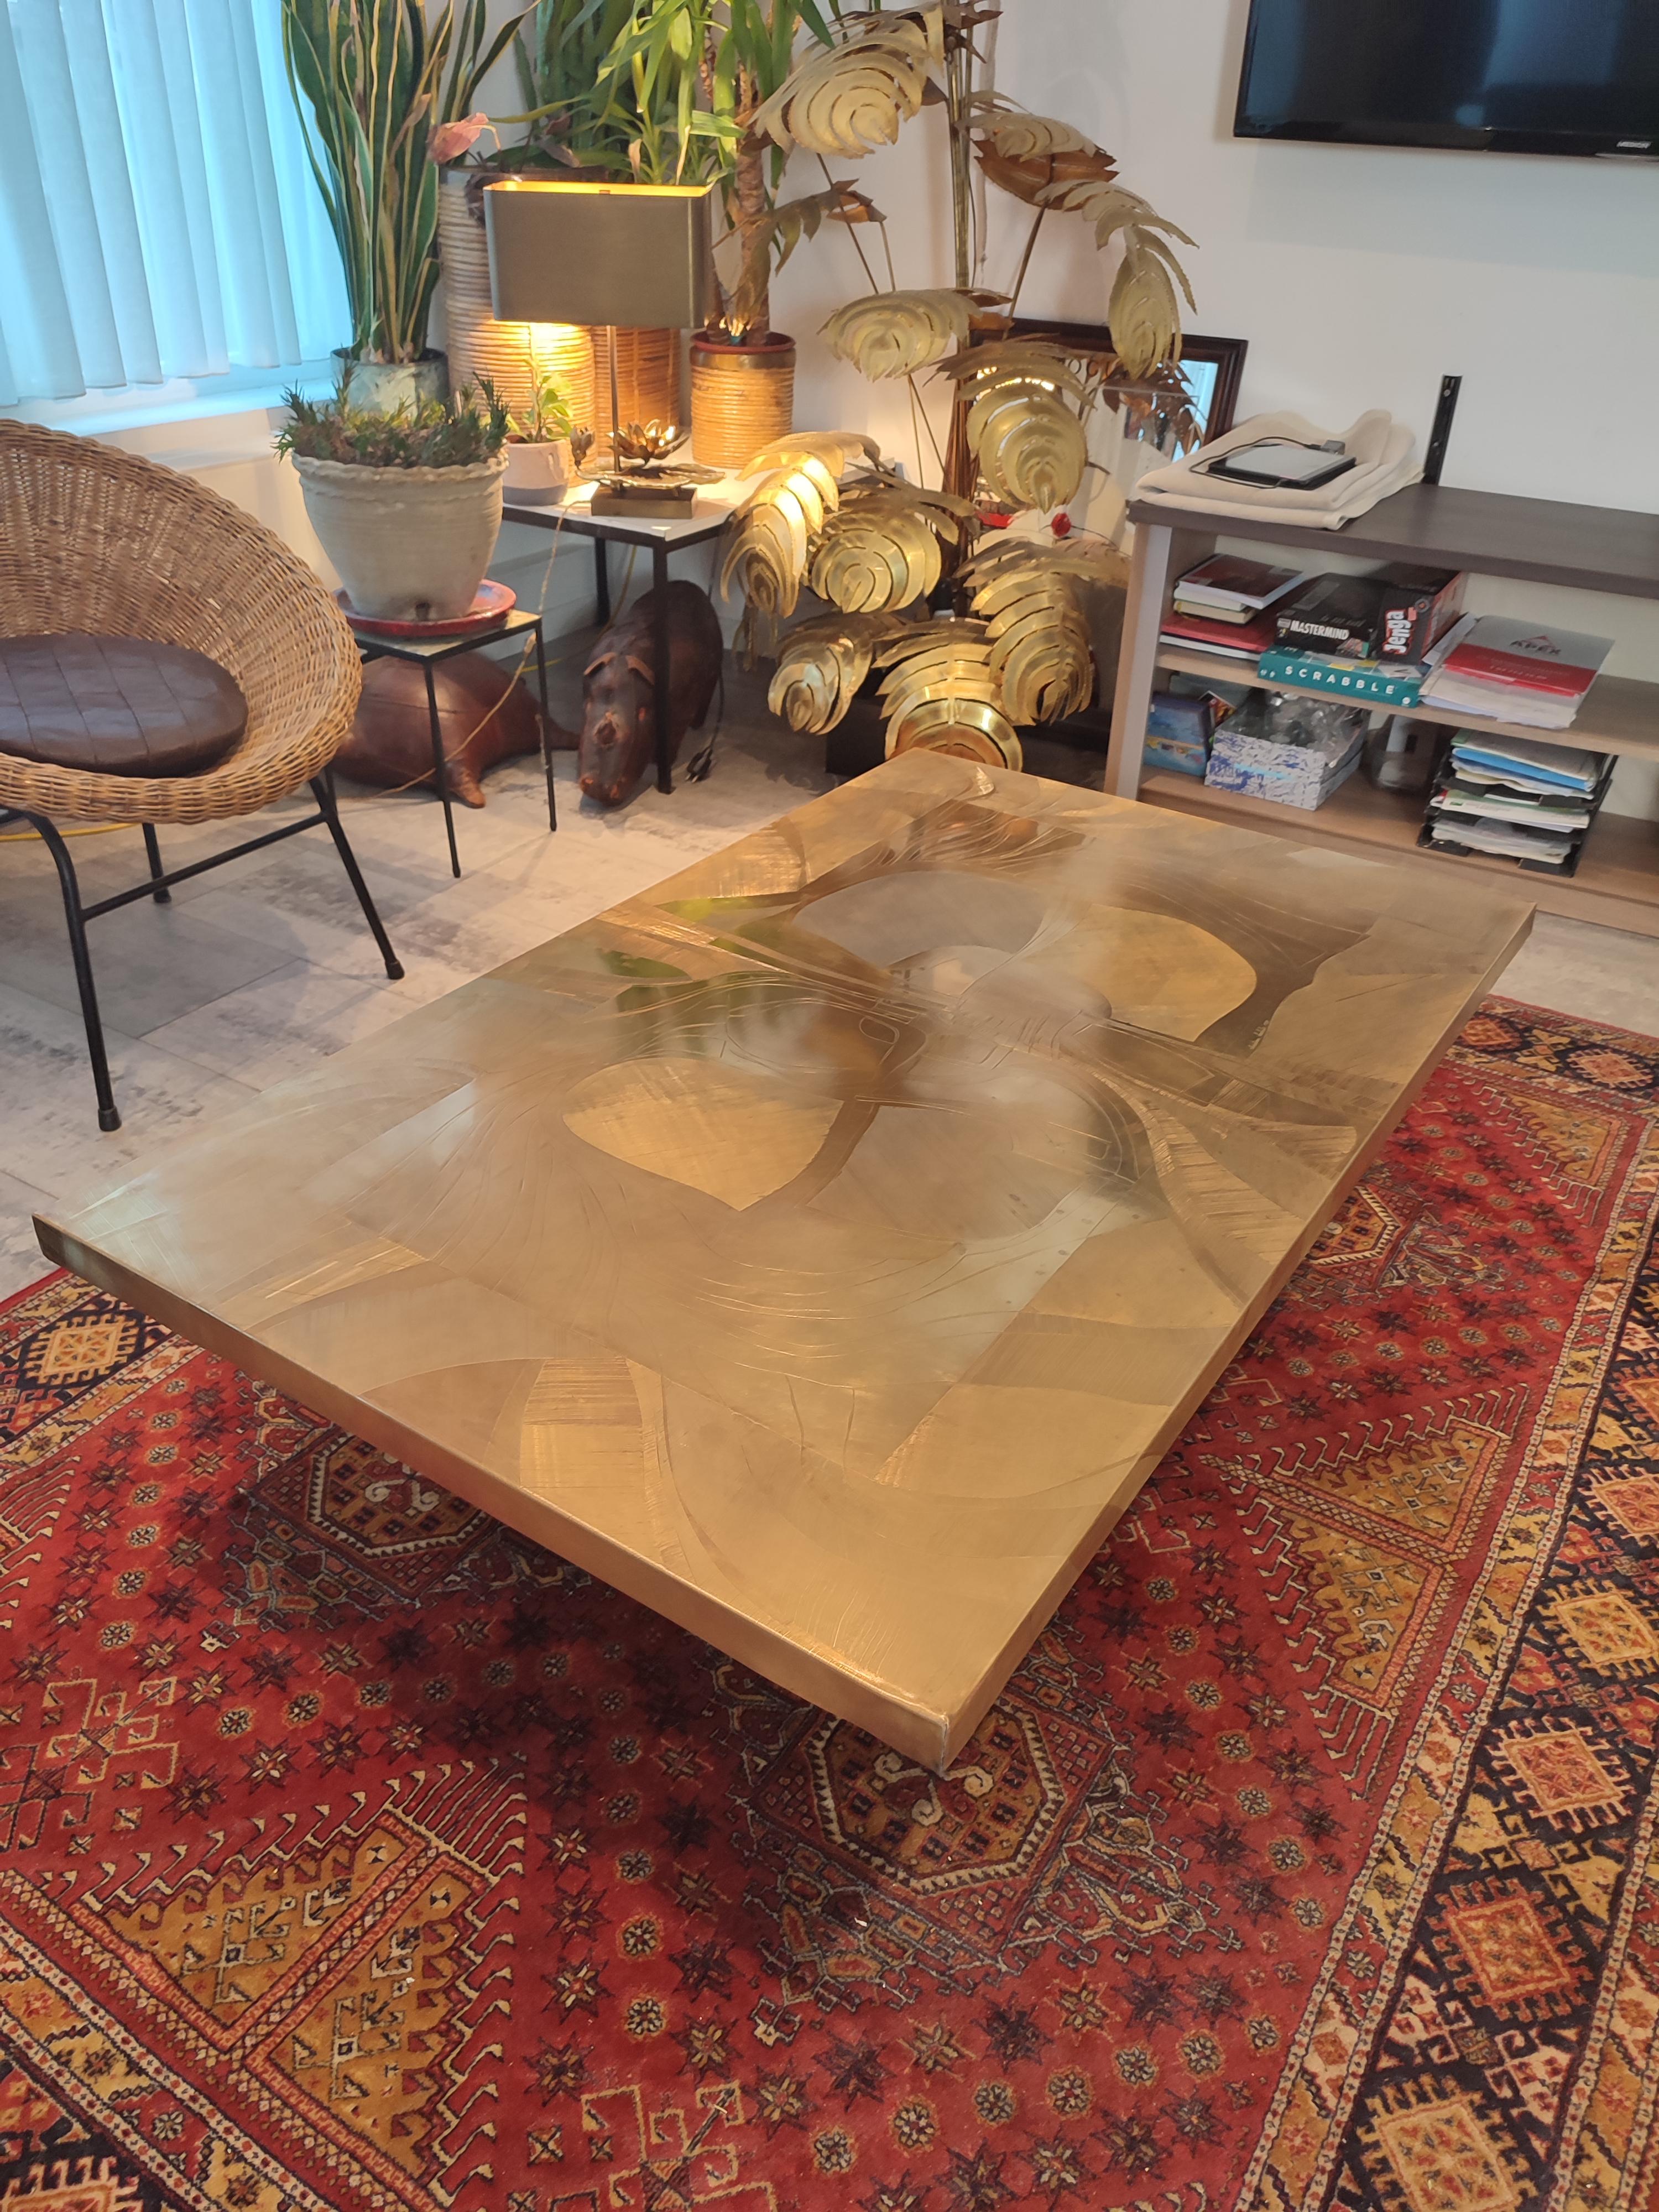 The table was made for a good friend of Christian Krekels 